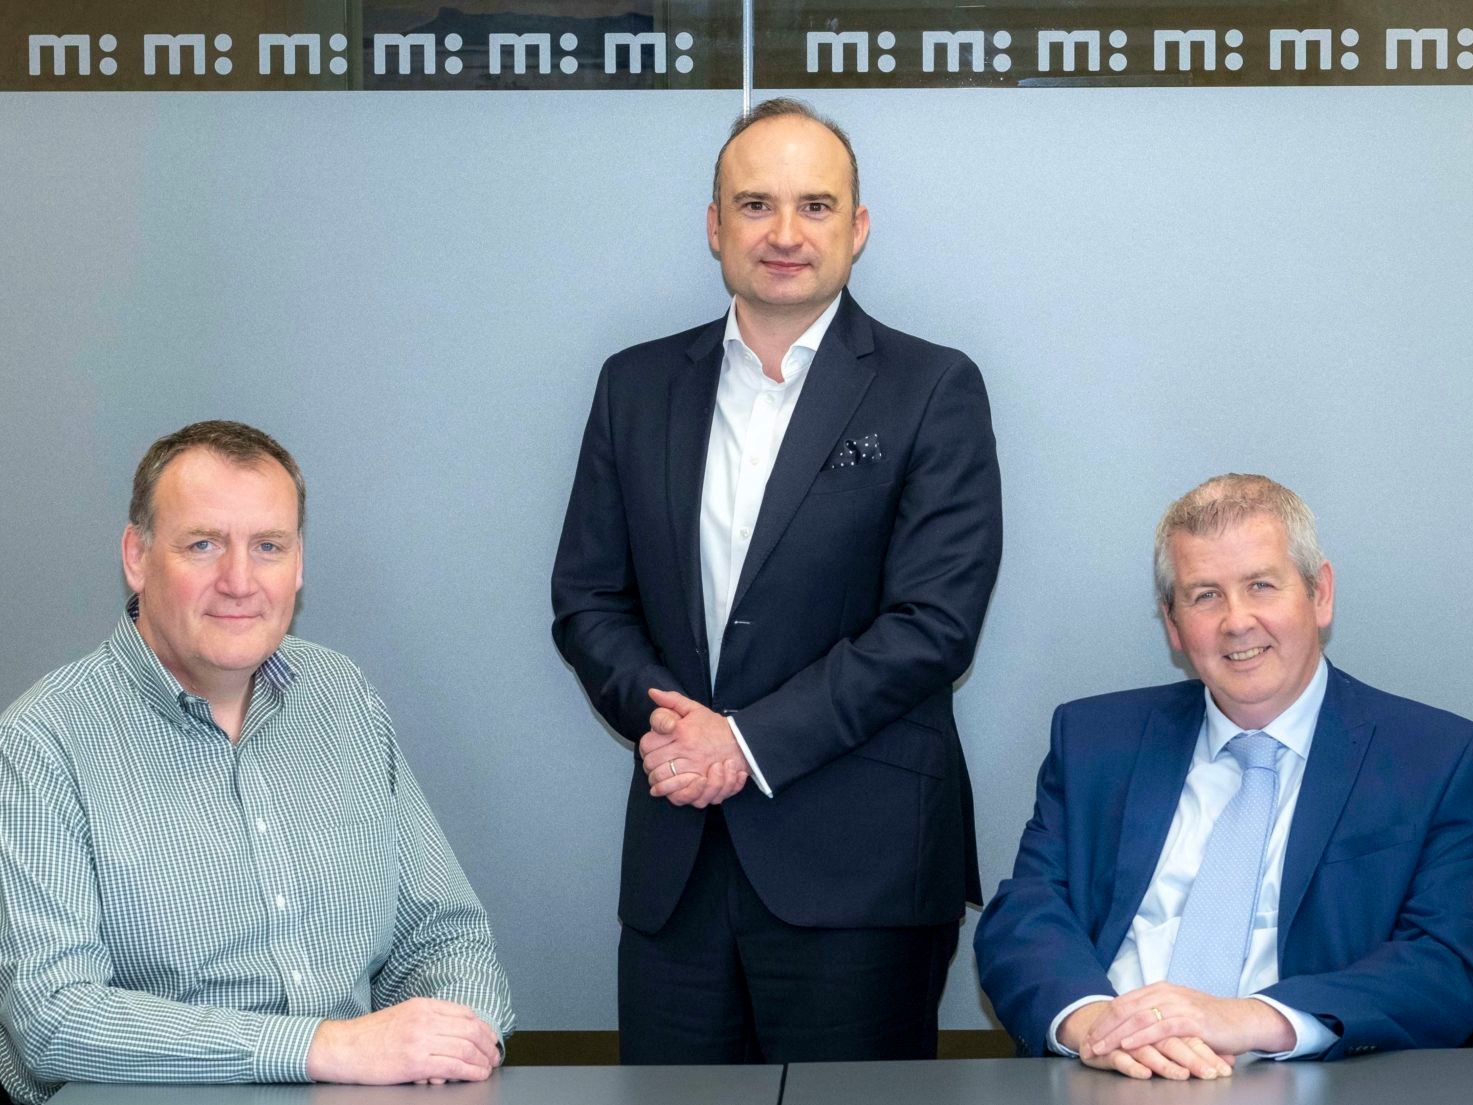 Growth at Murgitroyd fuelled by acquisition 